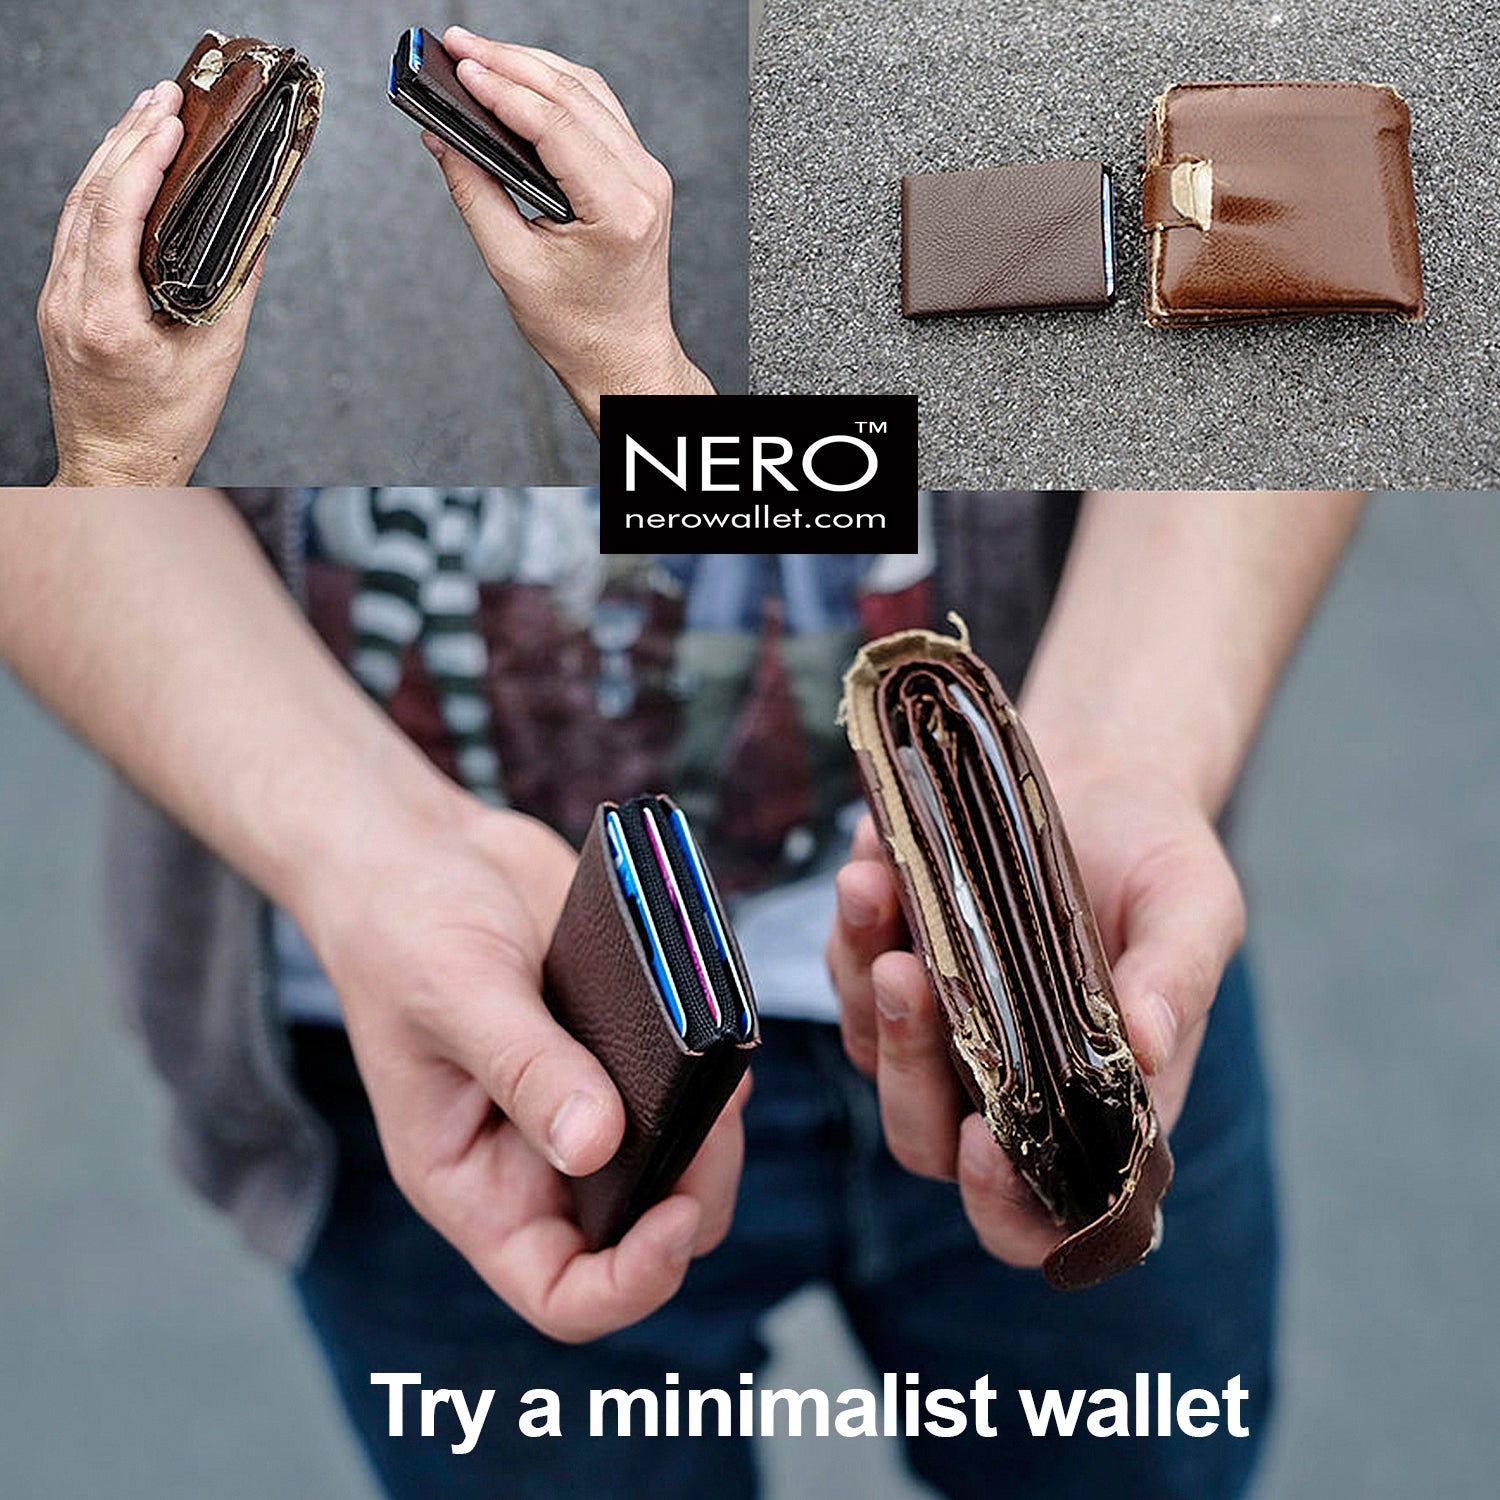 Are Minimalist Wallets Good for Women Too? Here's What You Need to Know